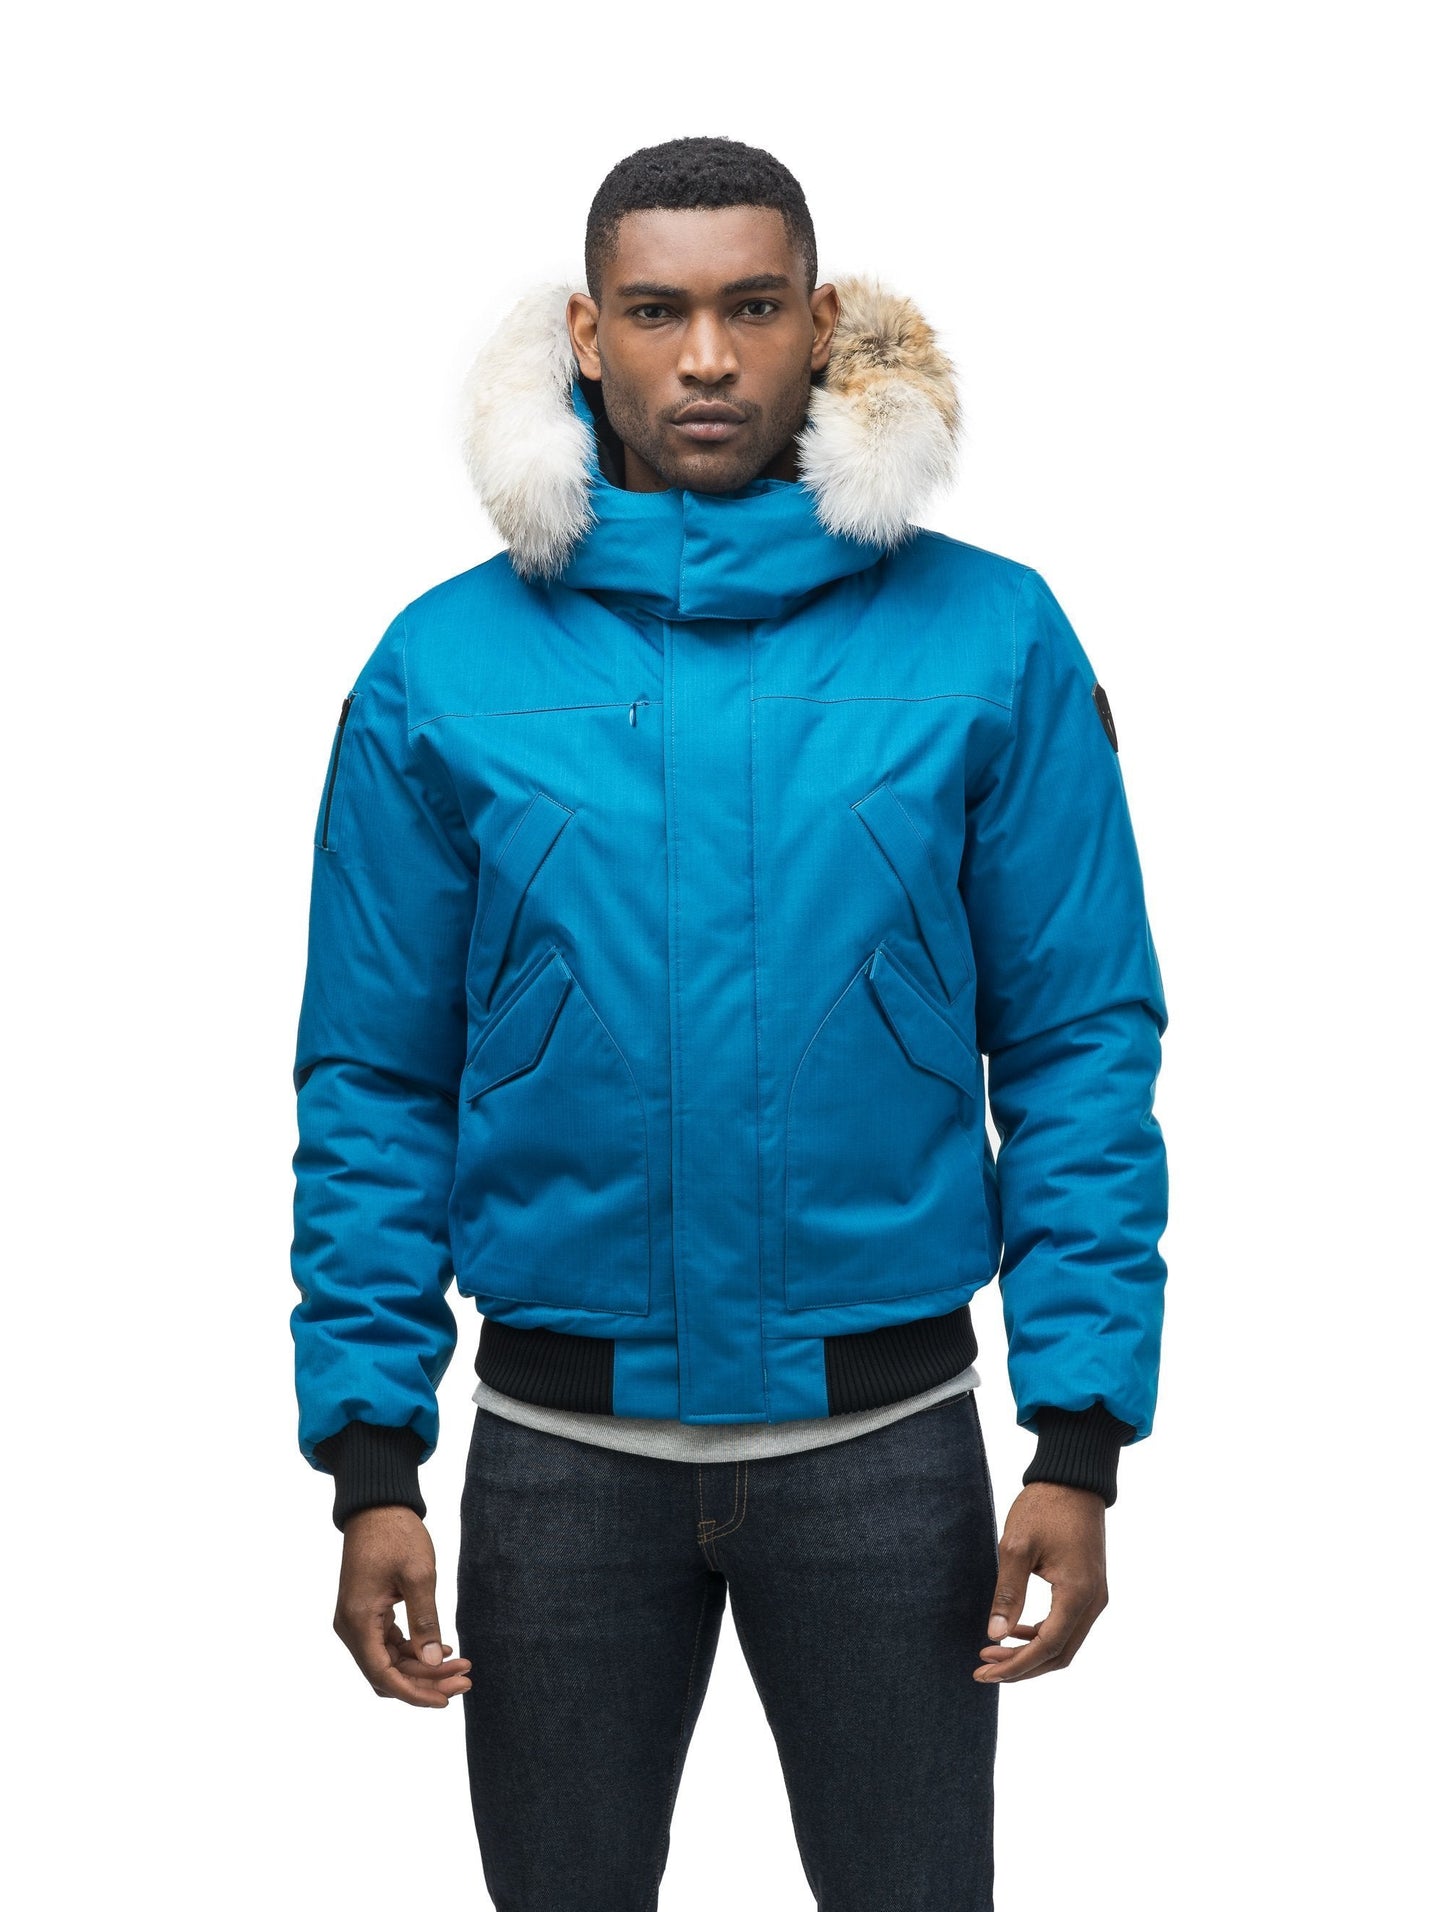 Men's classic down filled bomber jacket with a down filledÃ‚Â hood that features a removable coyote fur trim and concealed moldable framing wire in Sea Blue